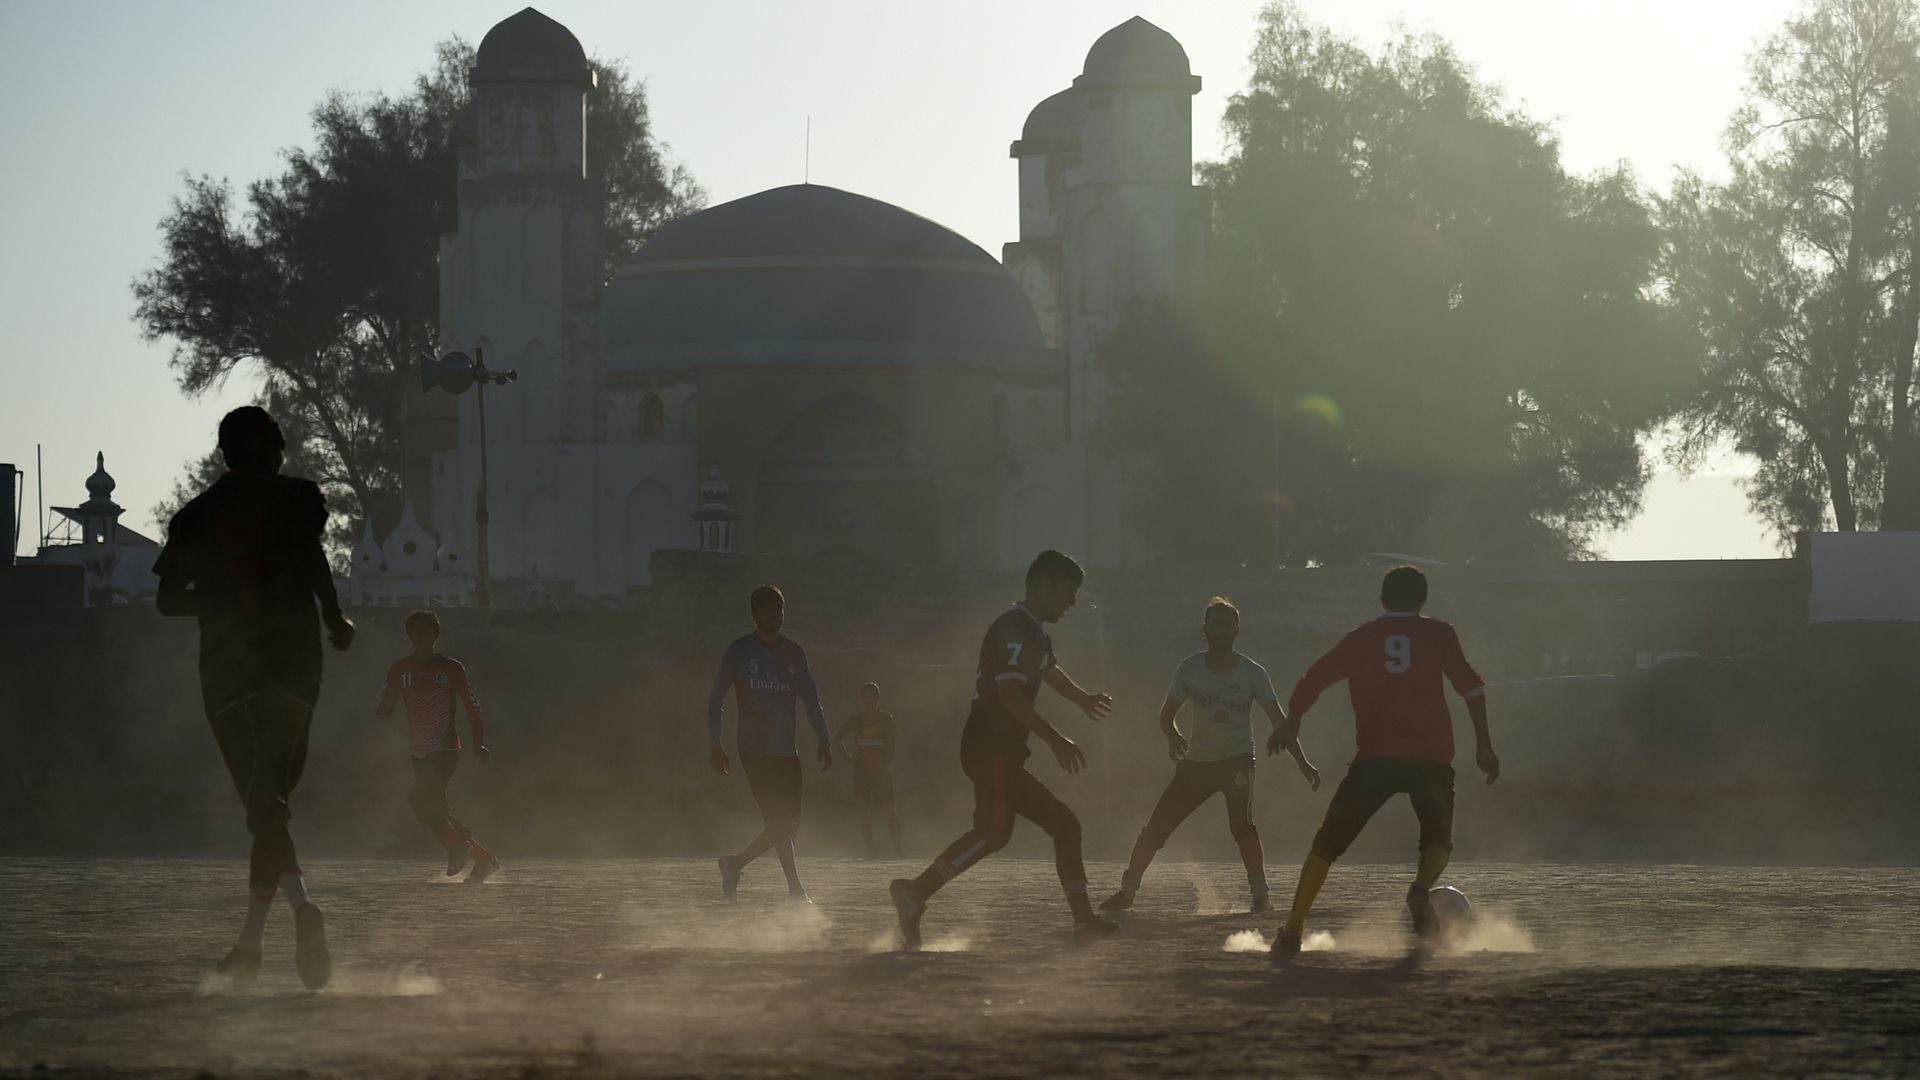 Youth soccer players in Afghanistan